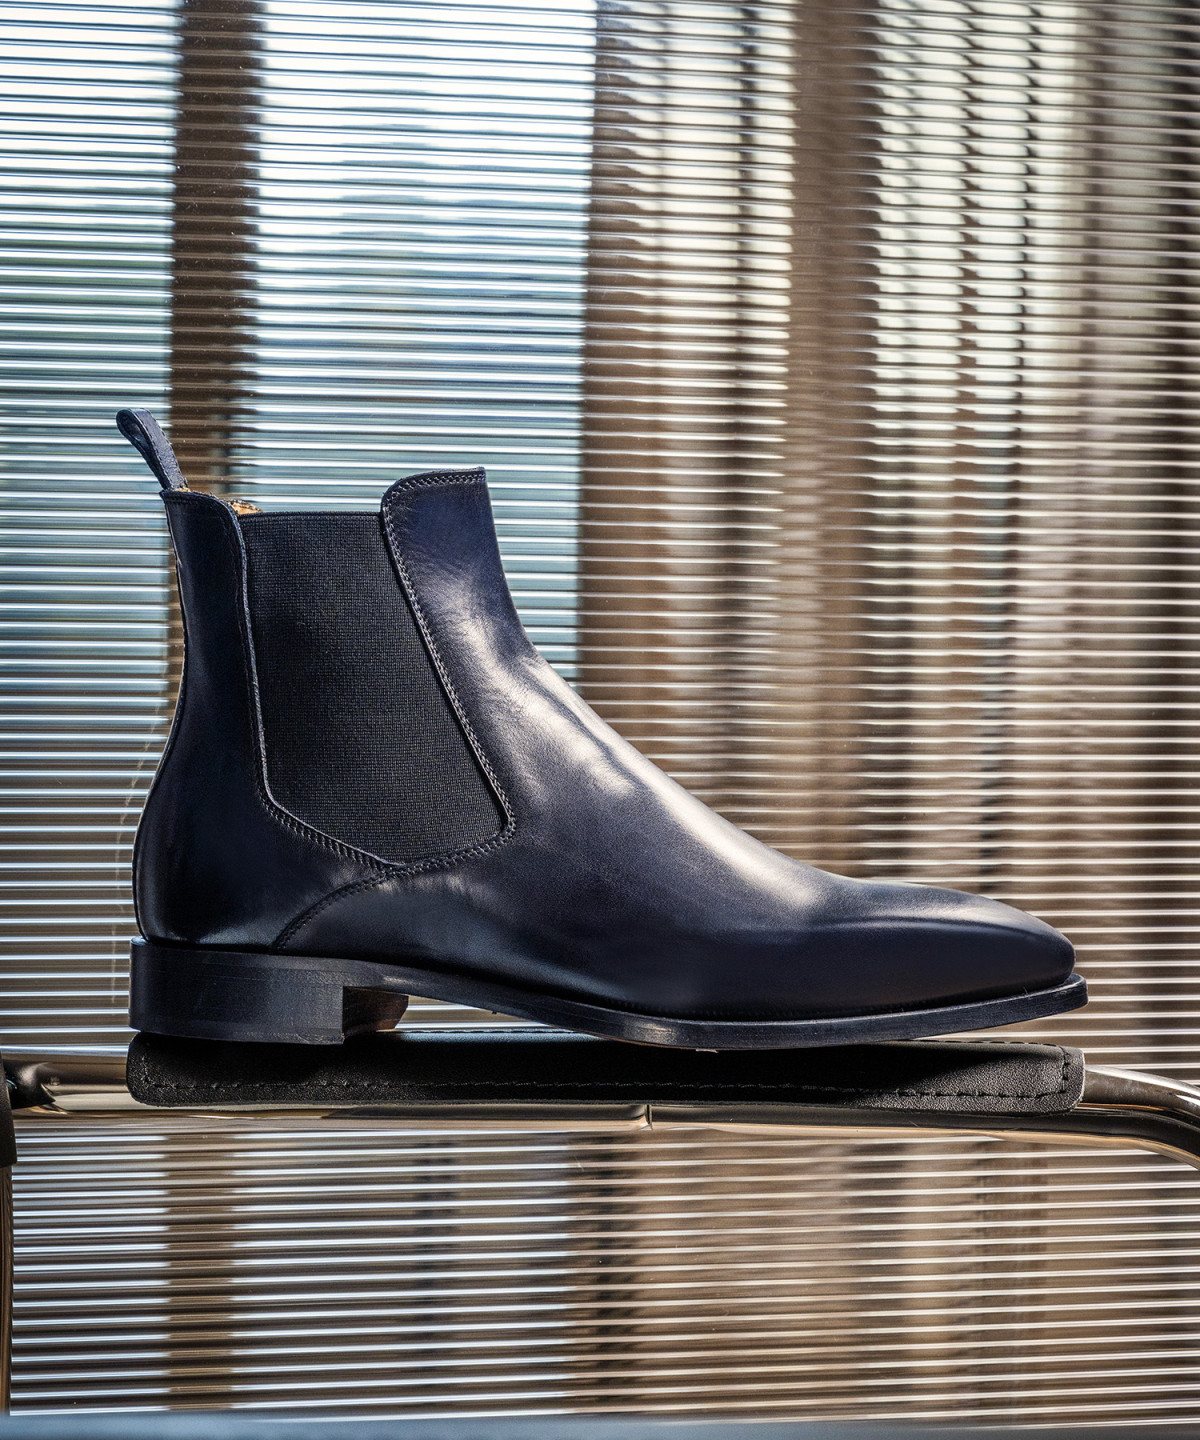 FIRENZE Night Blue Ankle Boots